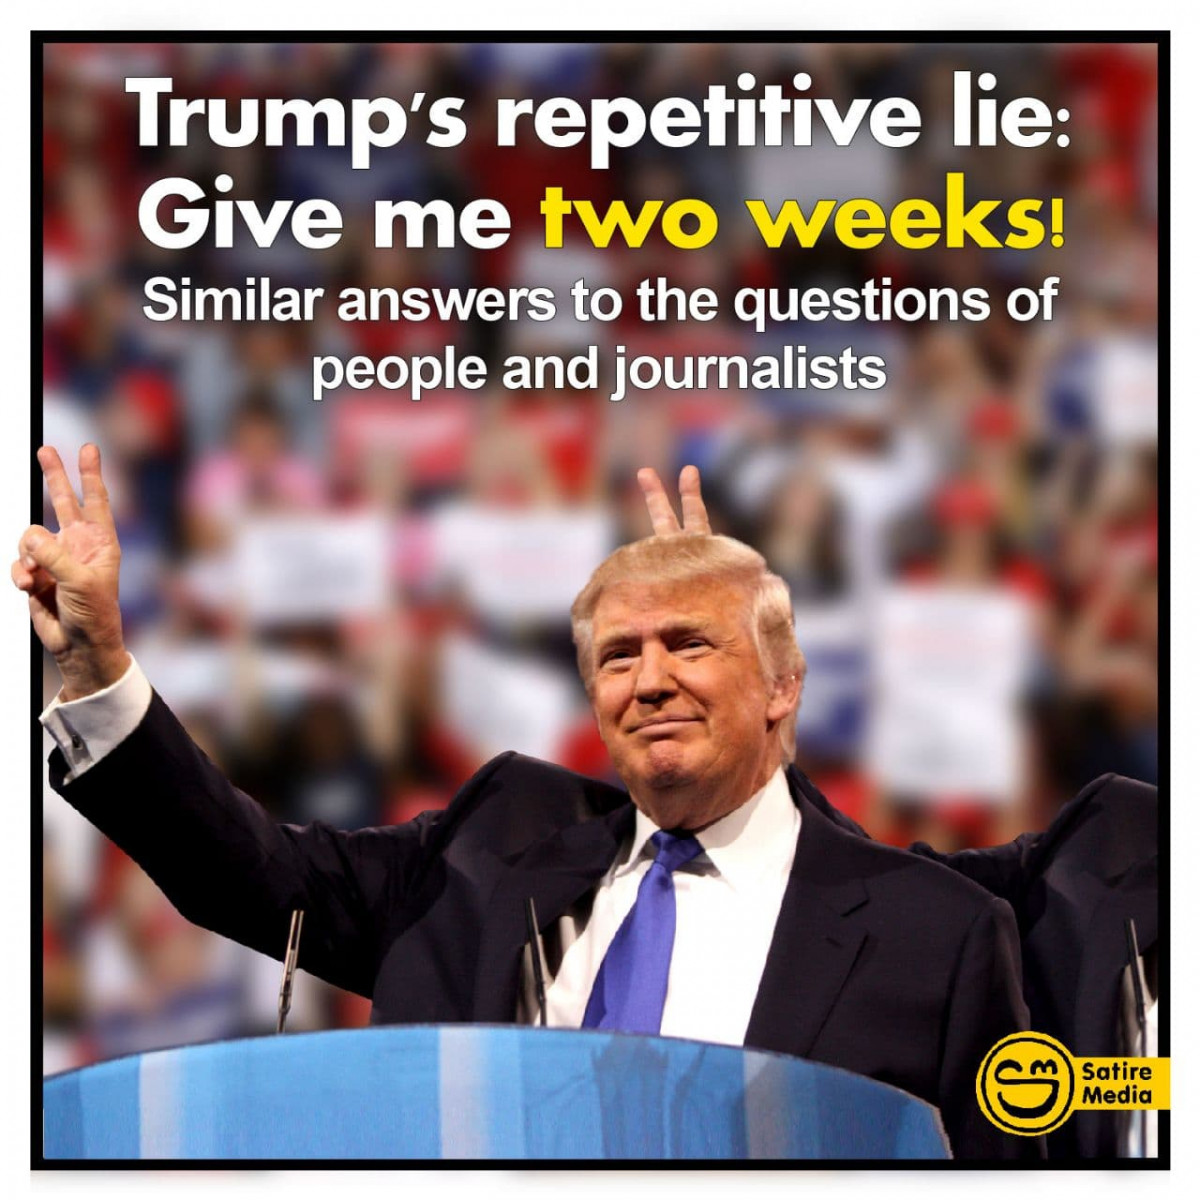 Trump's repetitive lie: Give me two weeks